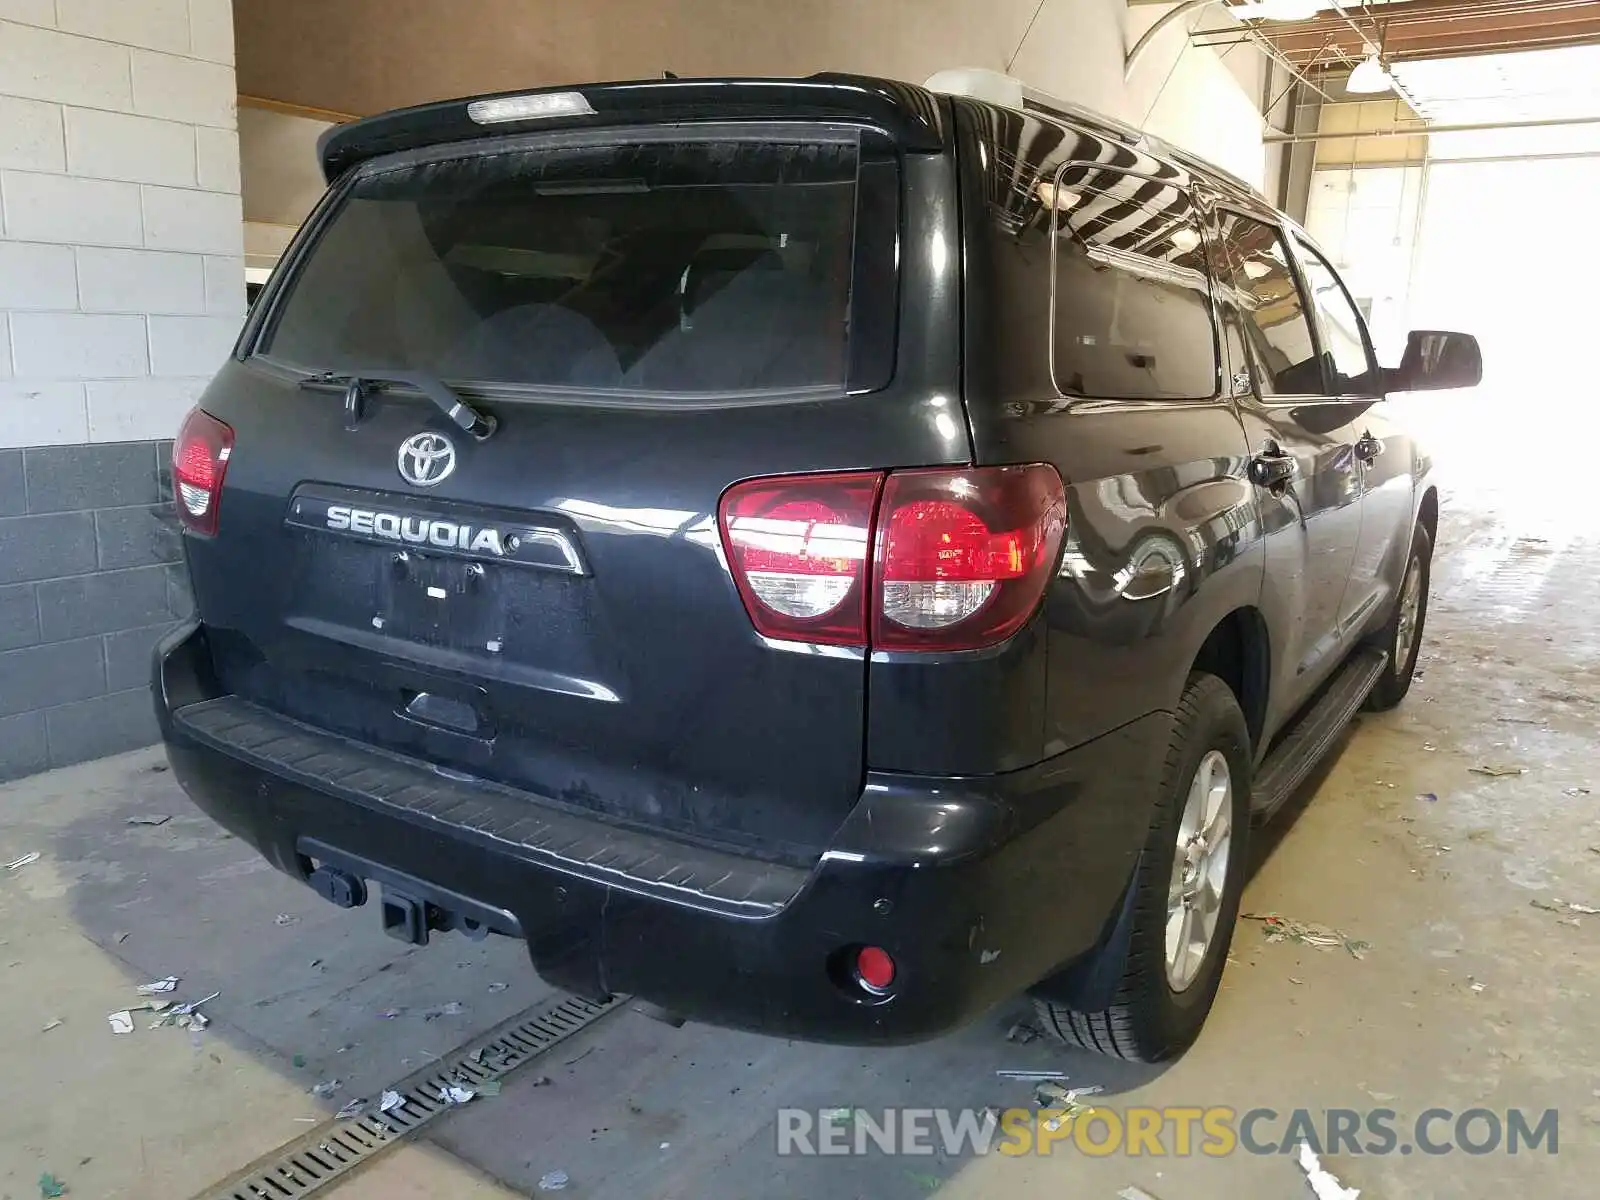 4 Photograph of a damaged car 5TDBY5G11KS170381 TOYOTA SEQUOIA 2019